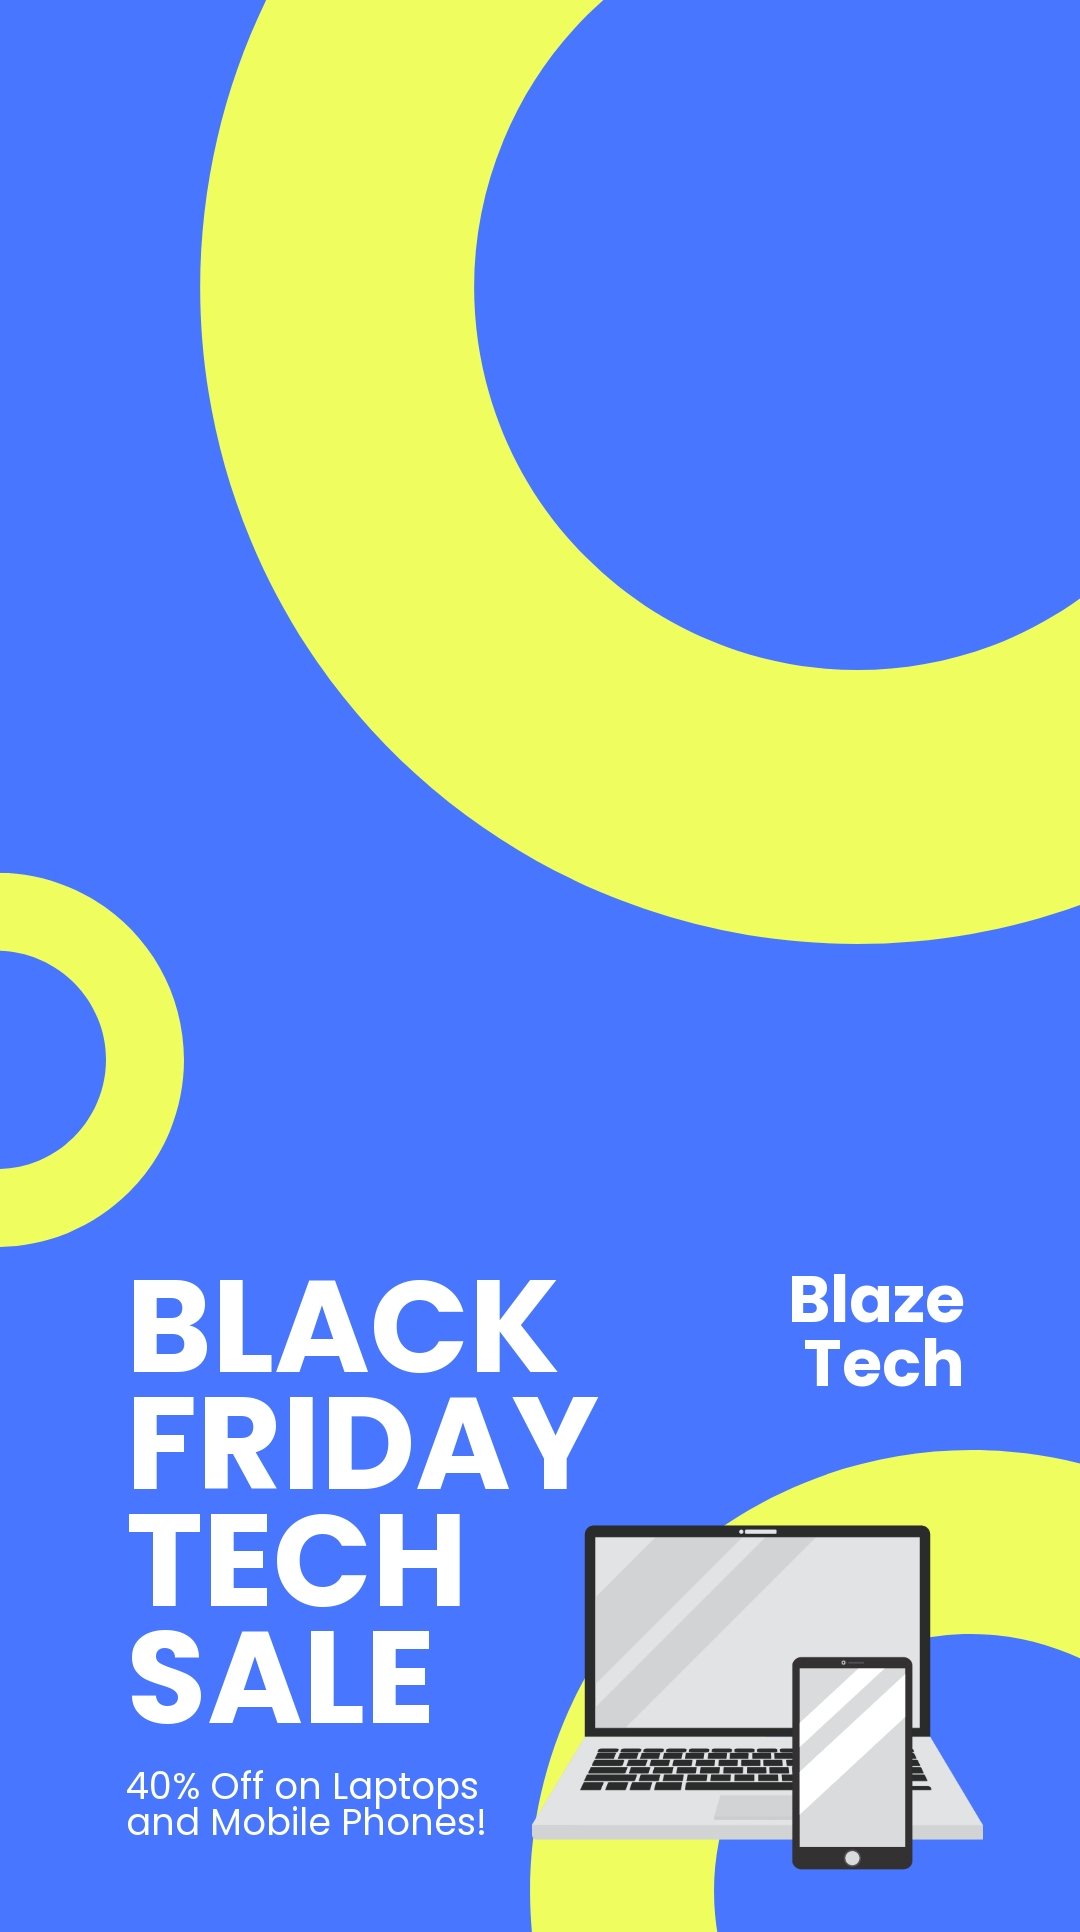 Free Black Friday Tech Sale Snapchat Geofilter Template